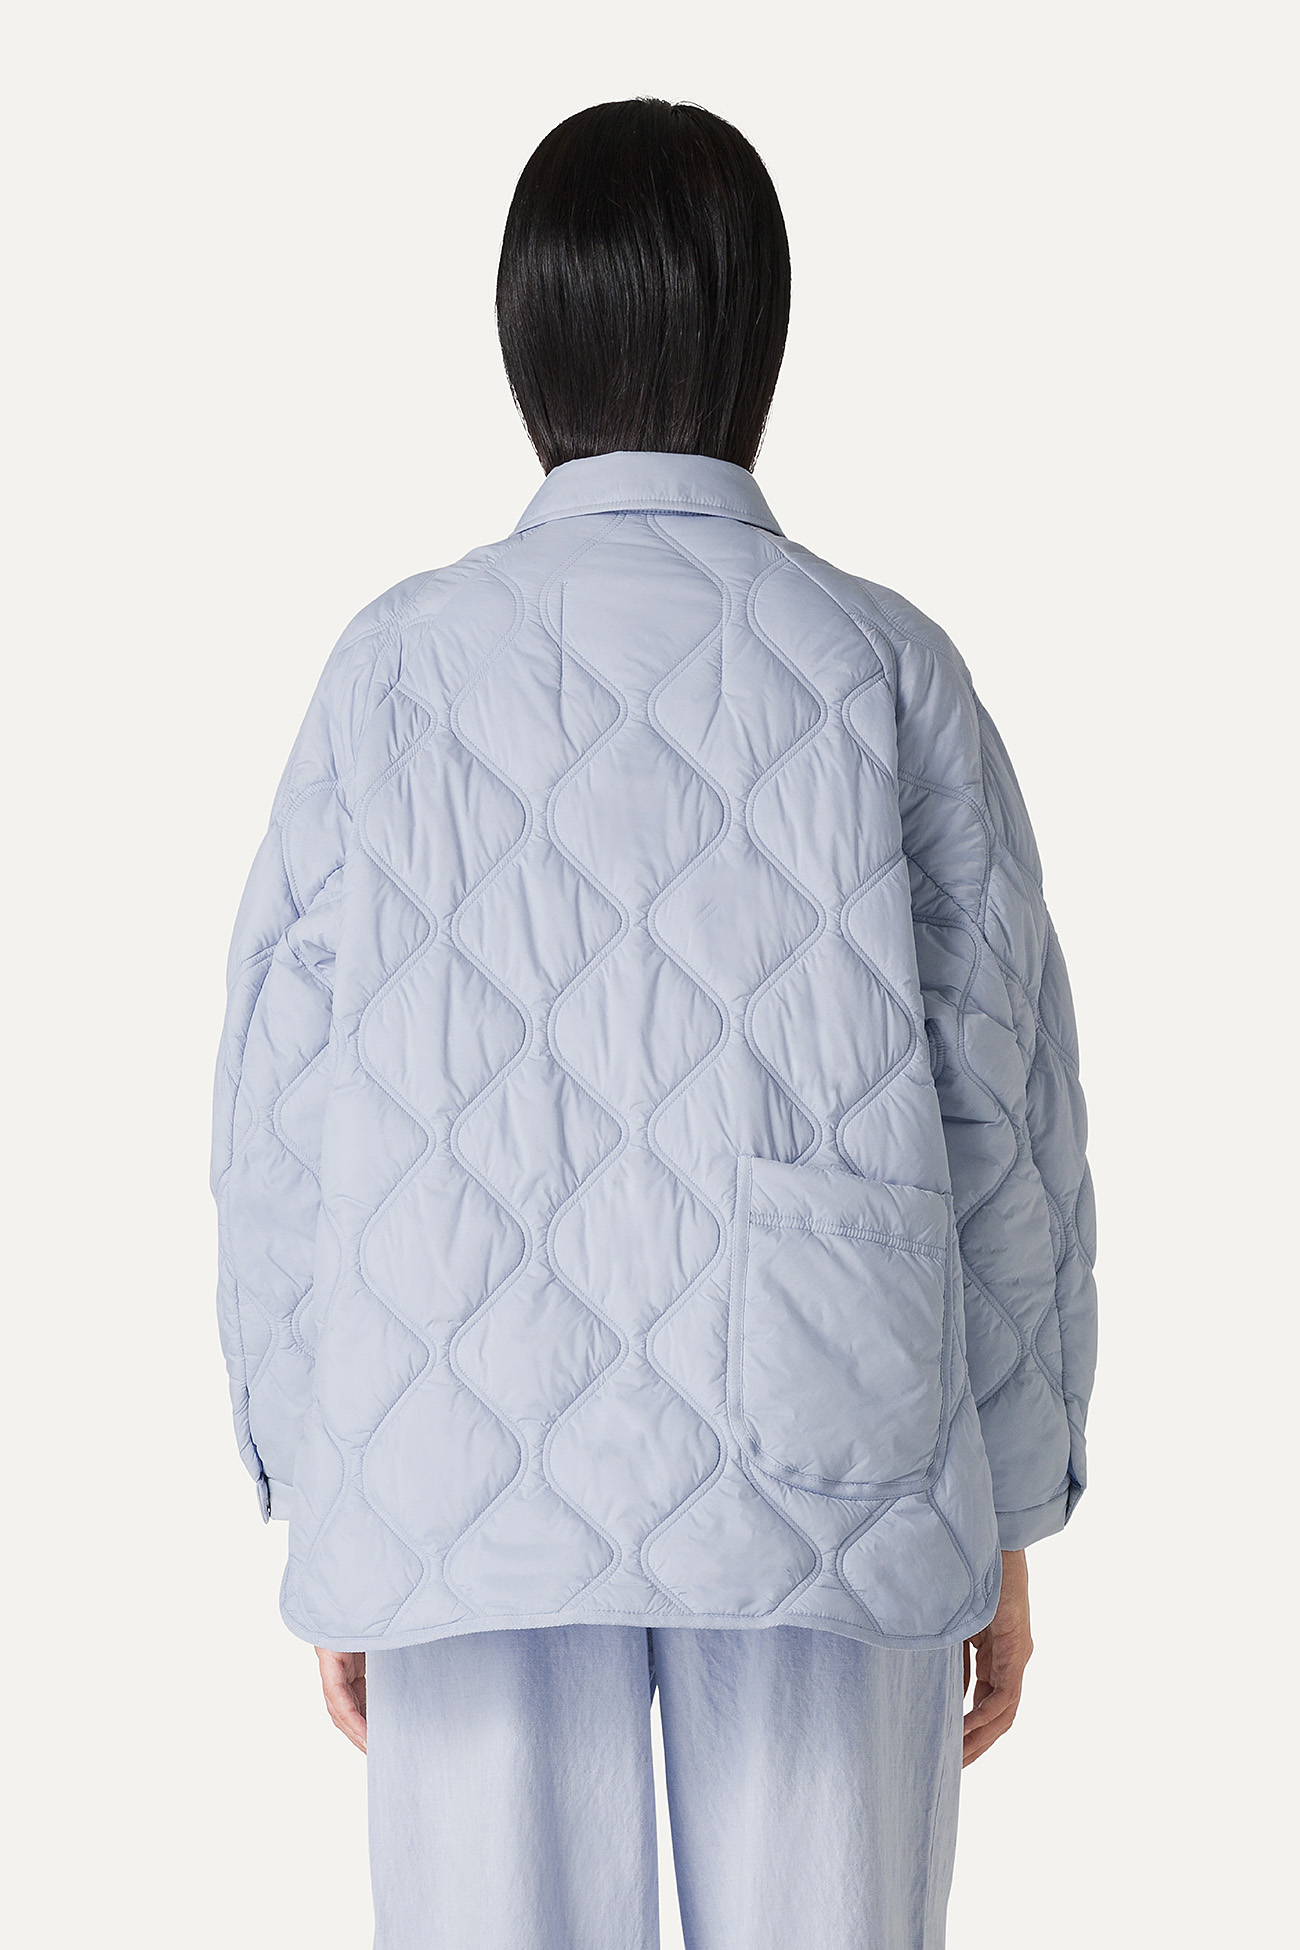 OVERSIZE JACKET IN QUILTED LIGHT NYLON 9222 - SKY BLUE - OOF WEAR